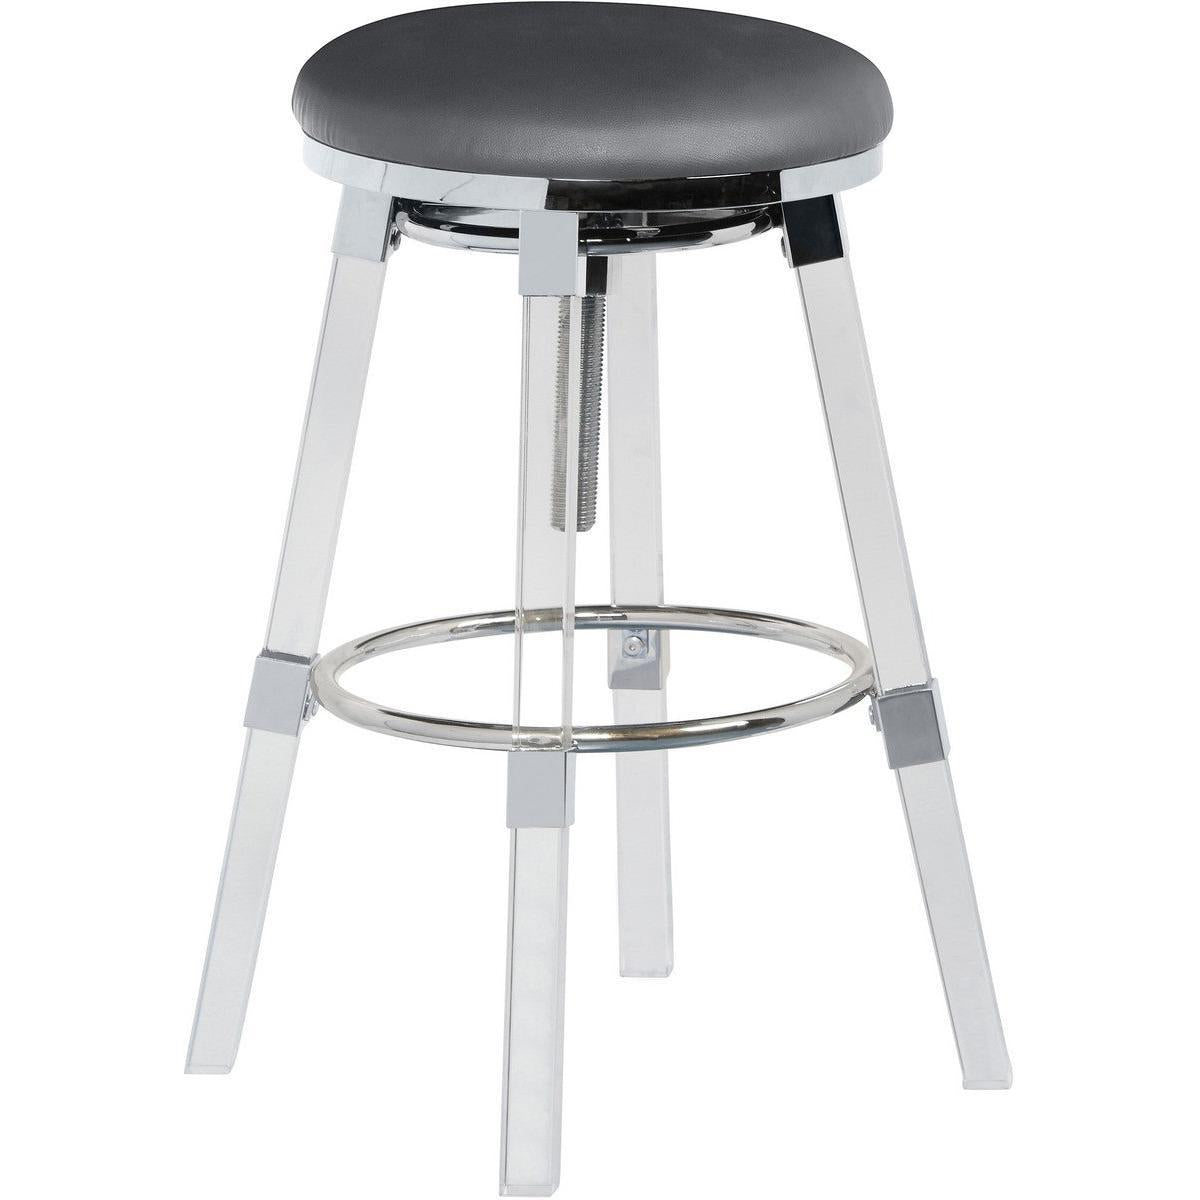 Meridian Furniture Venus Grey Faux Leather Adjustable StoolMeridian Furniture - Adjustable Stool - Minimal And Modern - 1